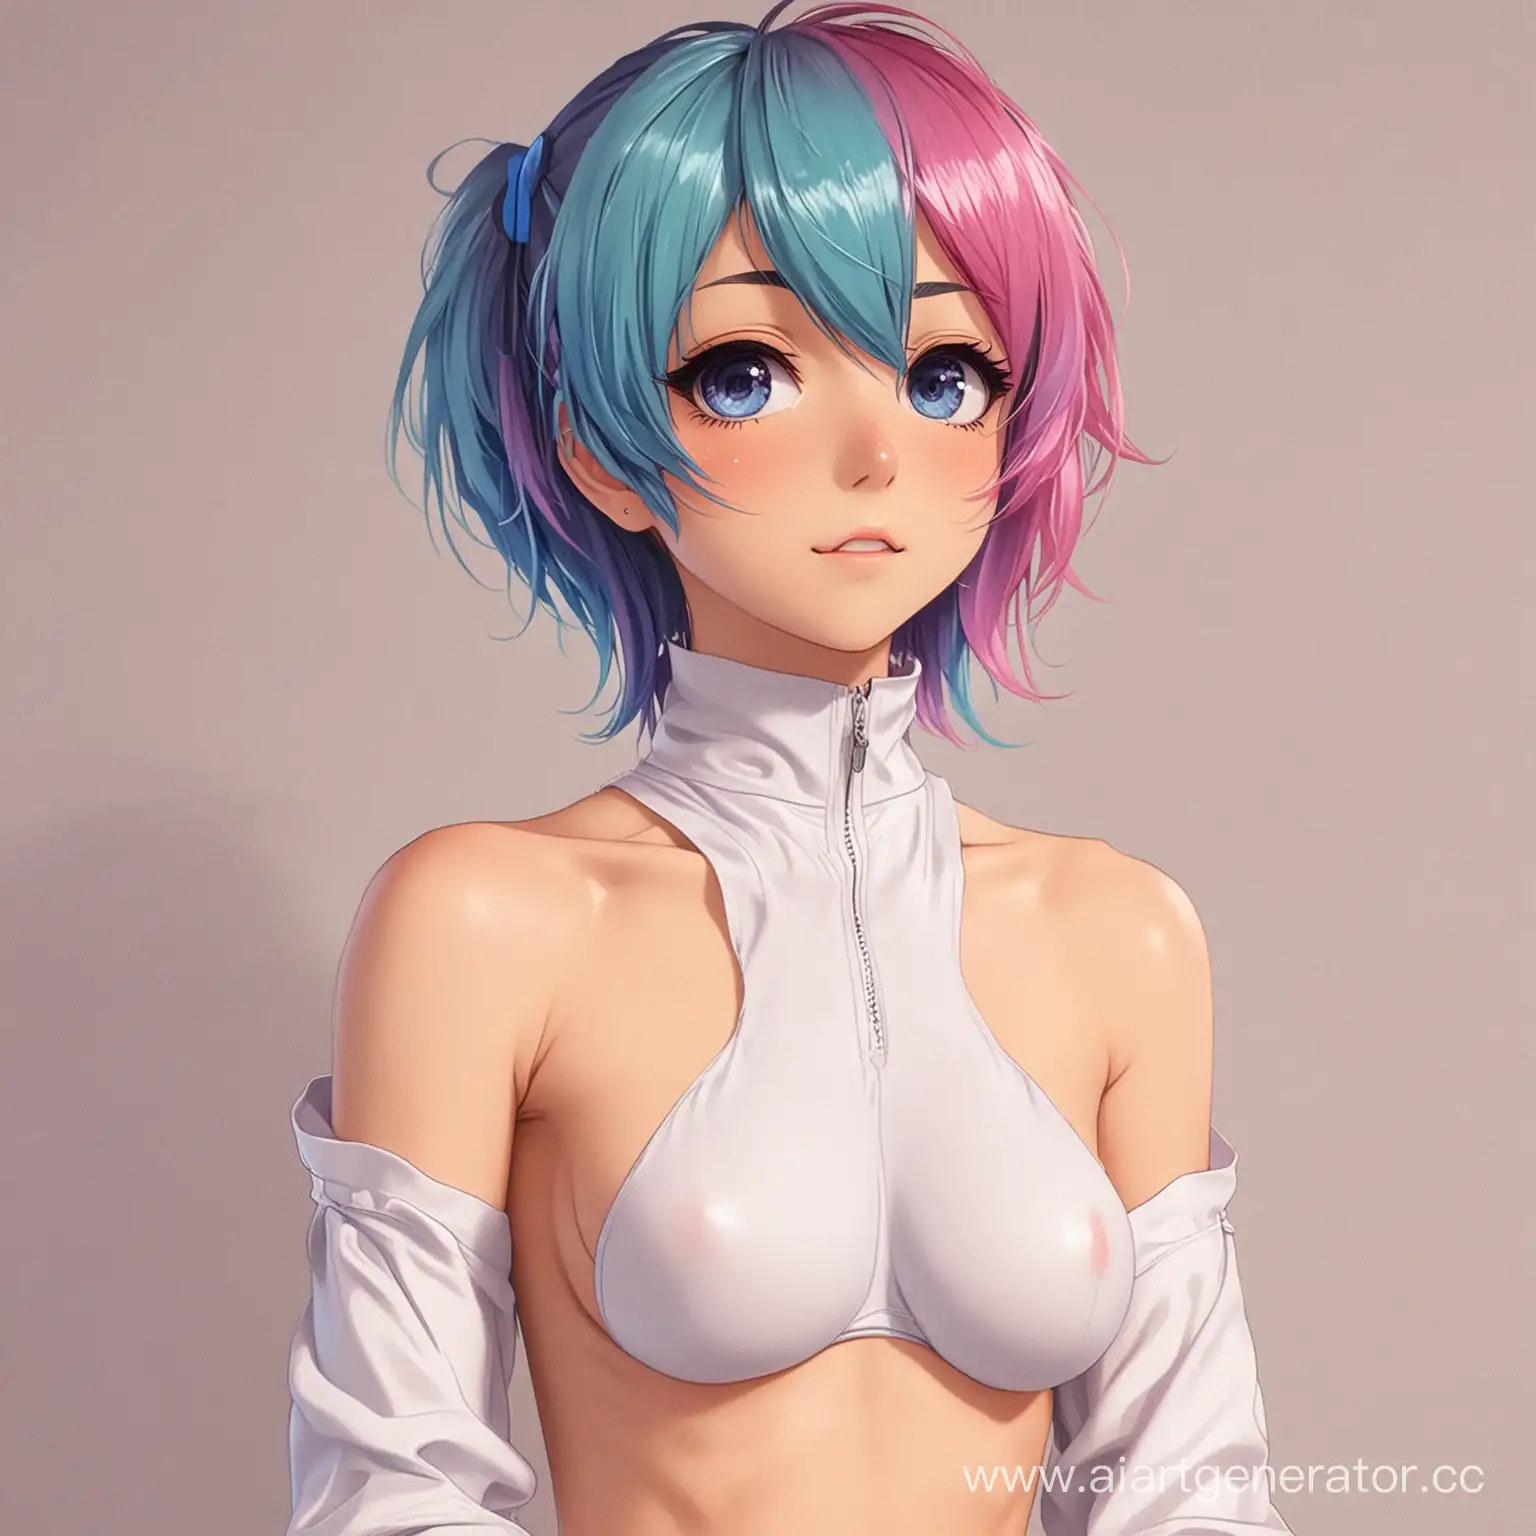 Colorful-Anime-Femboy-Illustration-with-LGBTQ-Themes